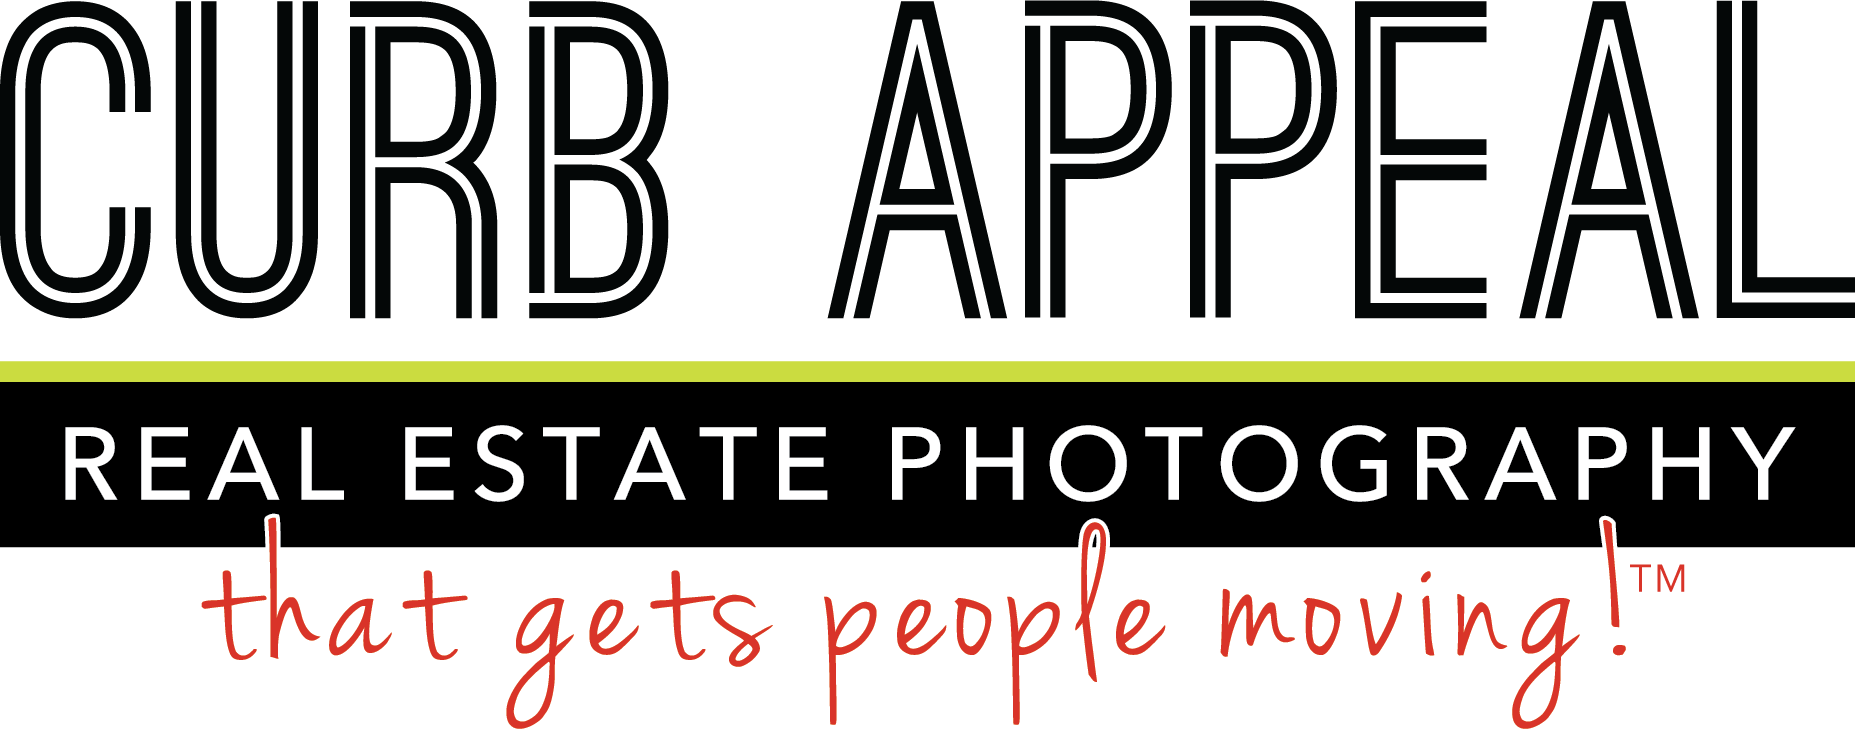 The logo for curb appeal real estate photography that gets people moving